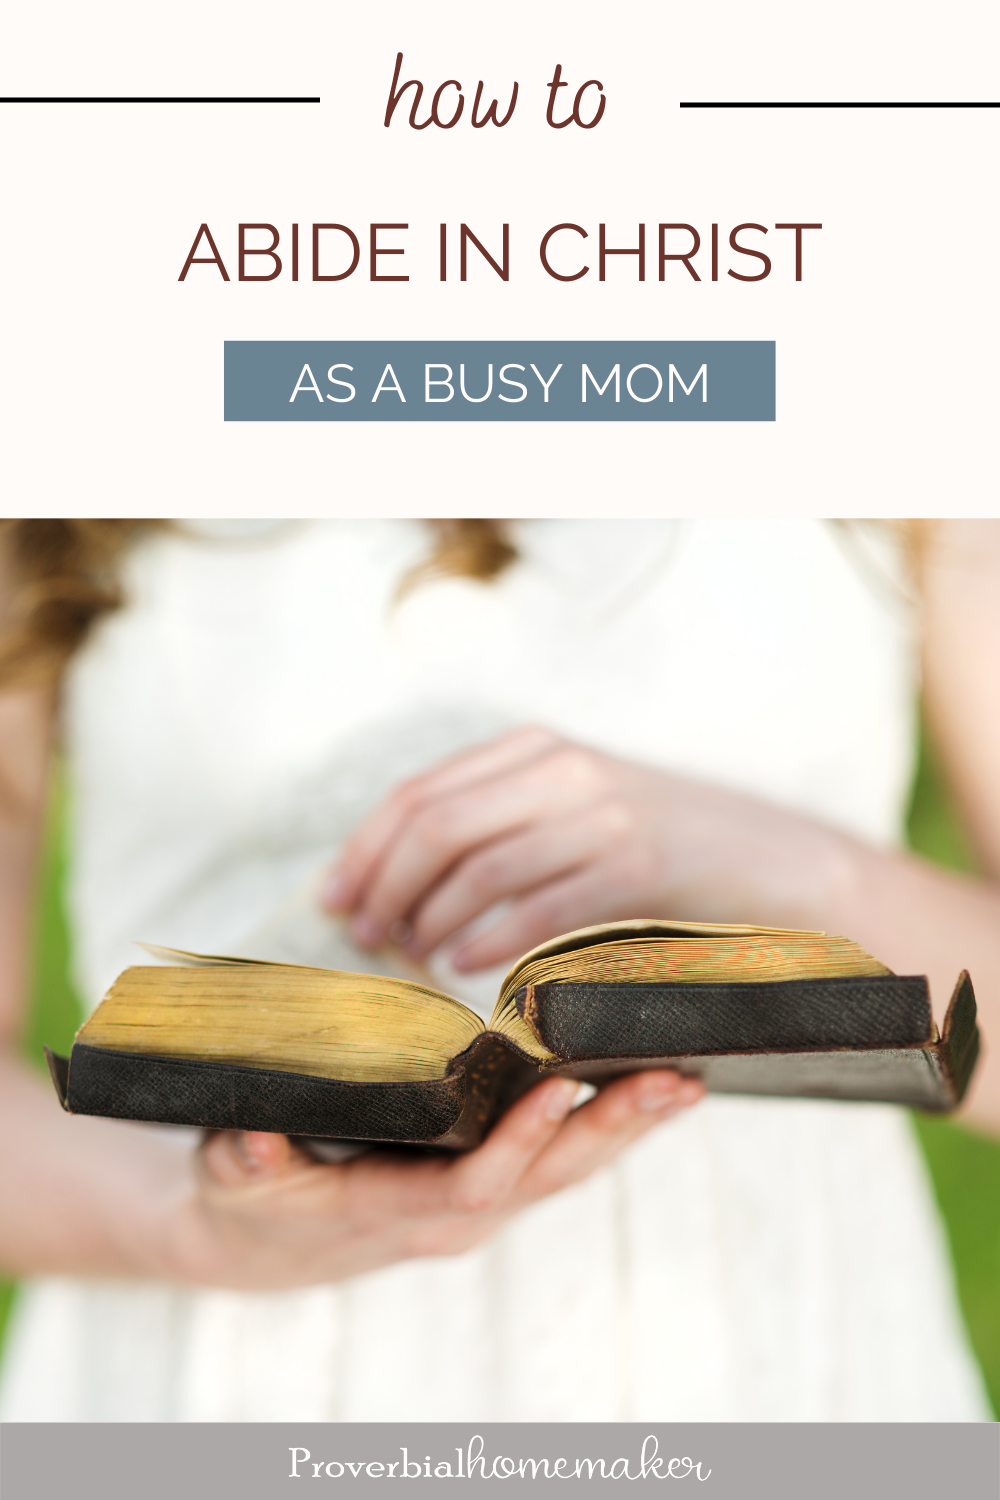 How to Abide in Christ as a Busy Mom